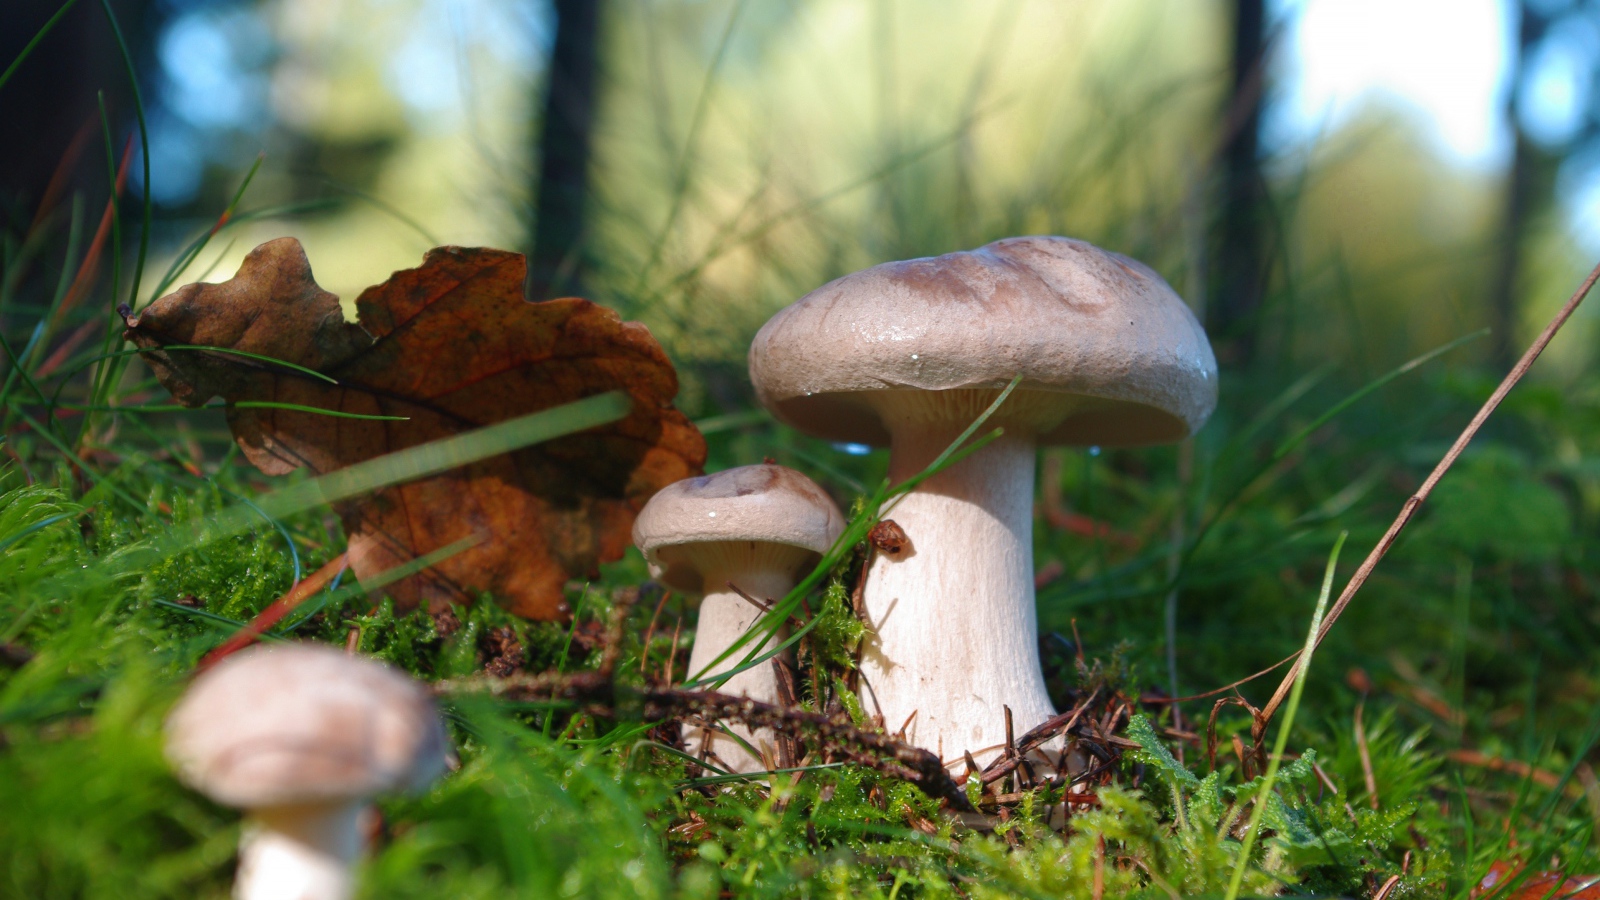 Beautiful forest mushrooms on moss covered ground